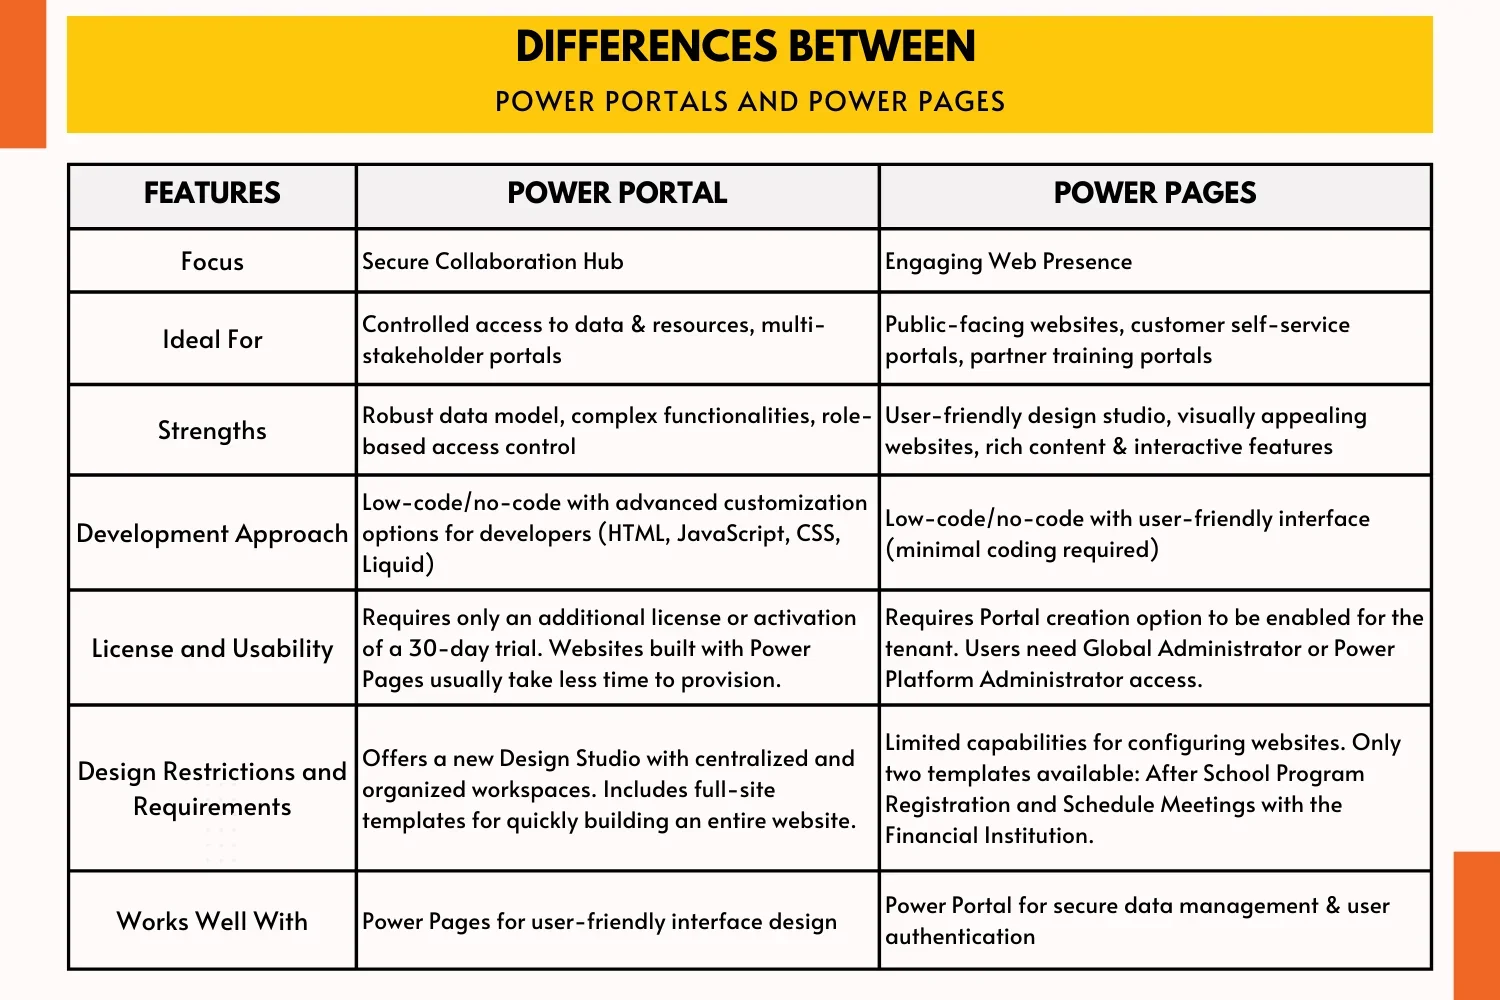 Difference Between Power Portals and Power Pages